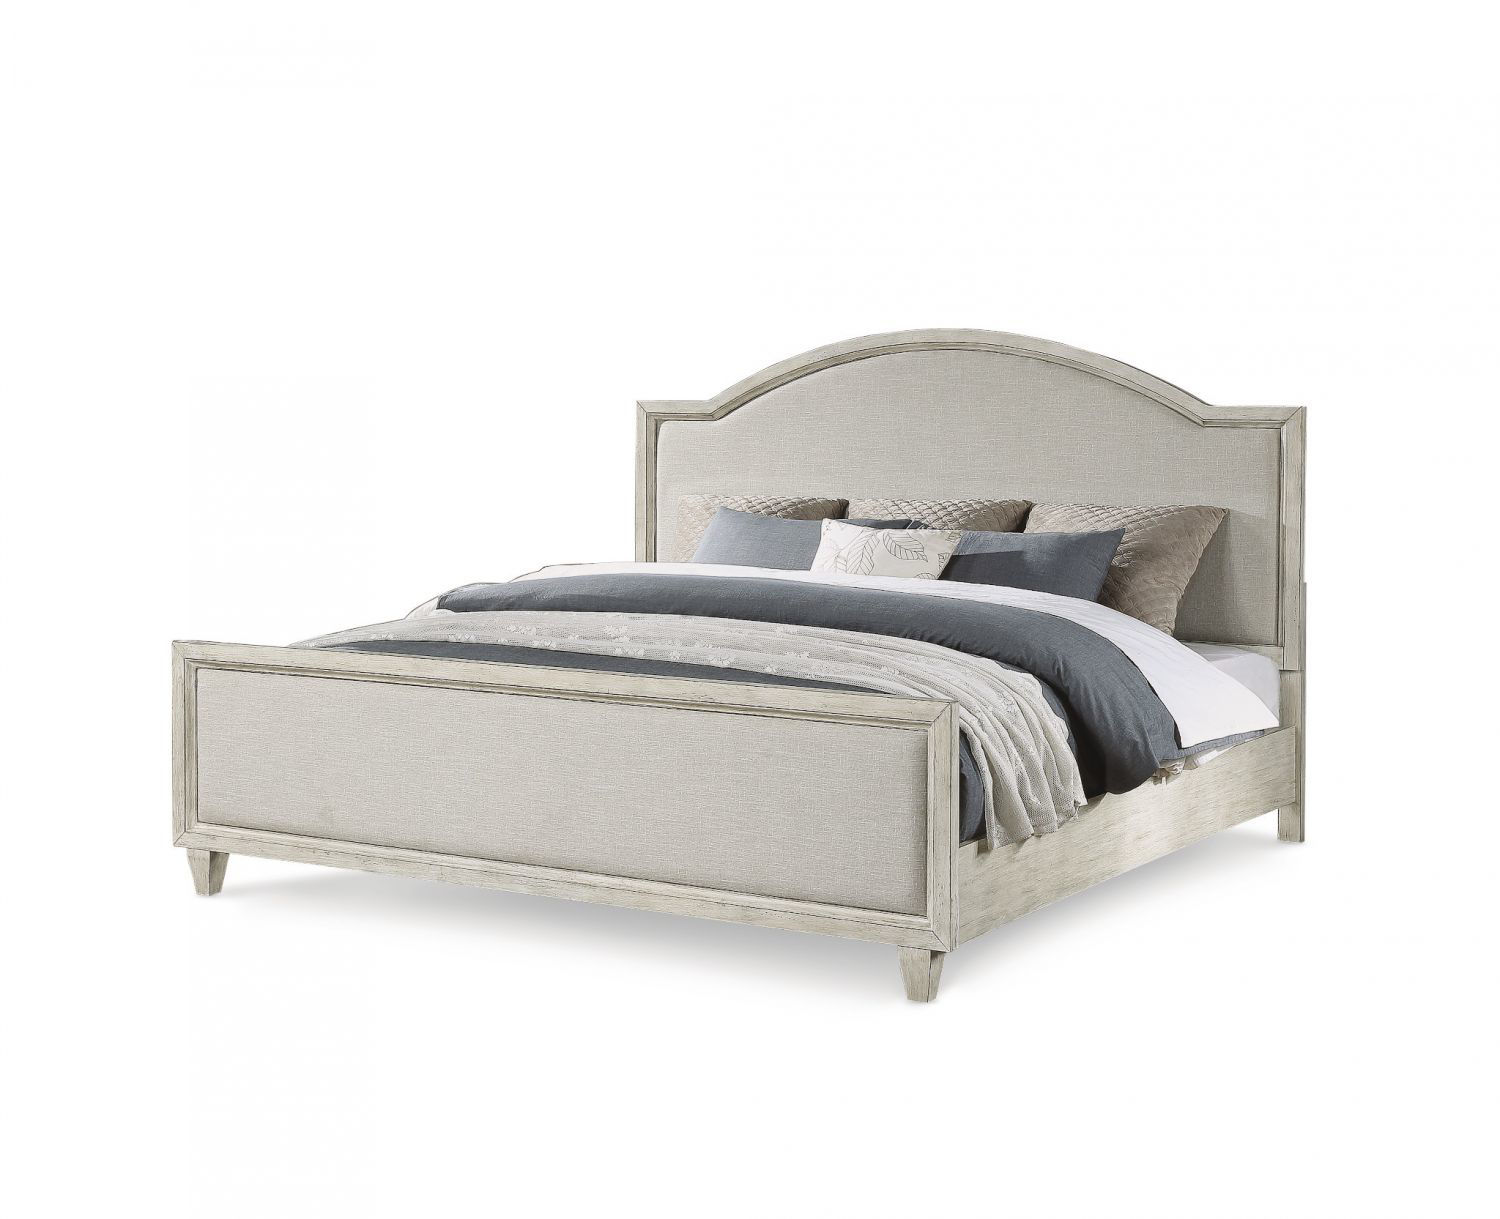 Newport Upholstered Queen Bed By, Grey Upholstered Headboard And Footboard